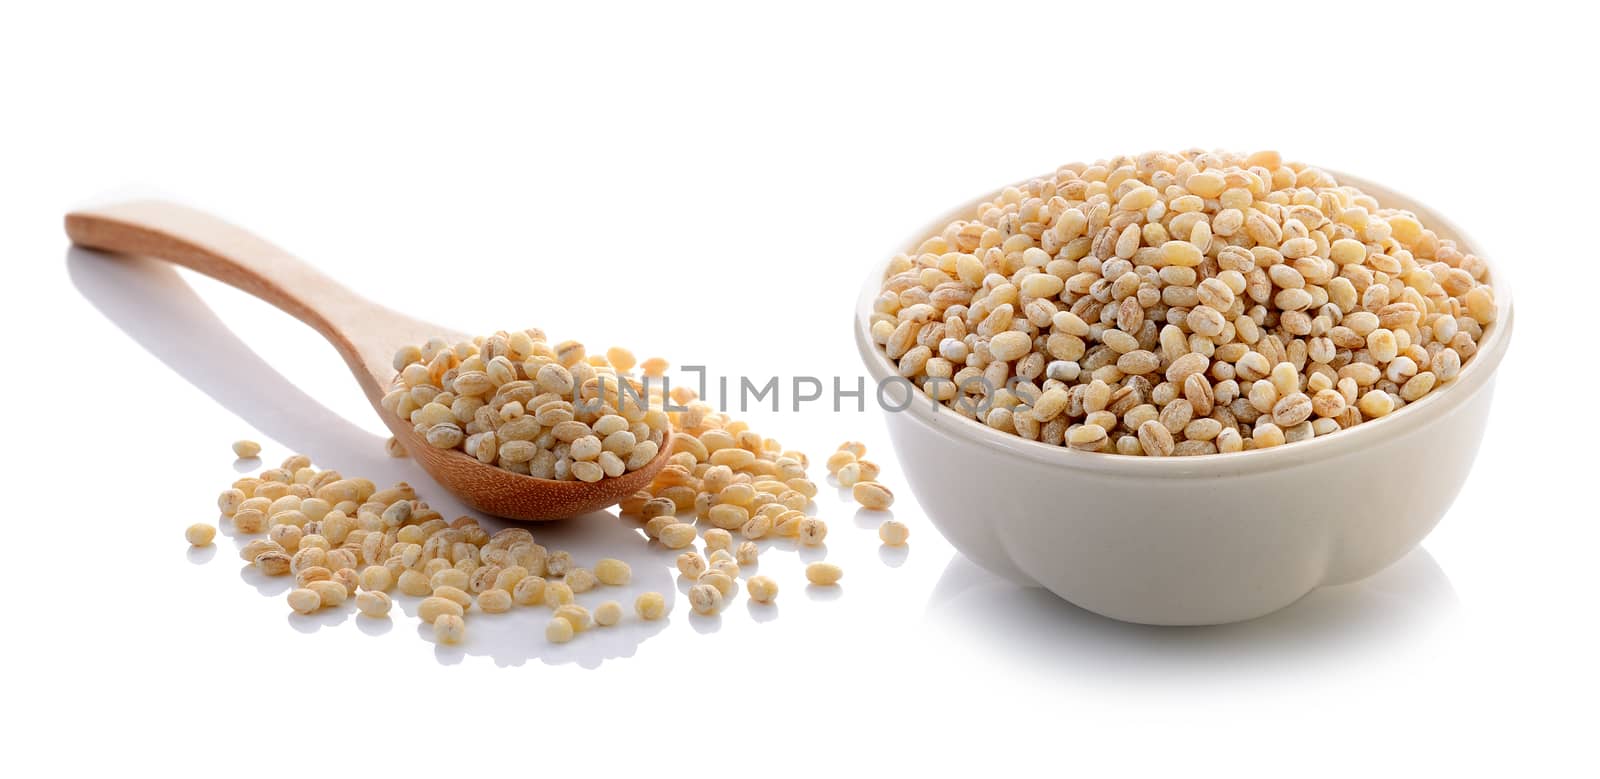 Job's tear seed in the white bowl on white background by sommai